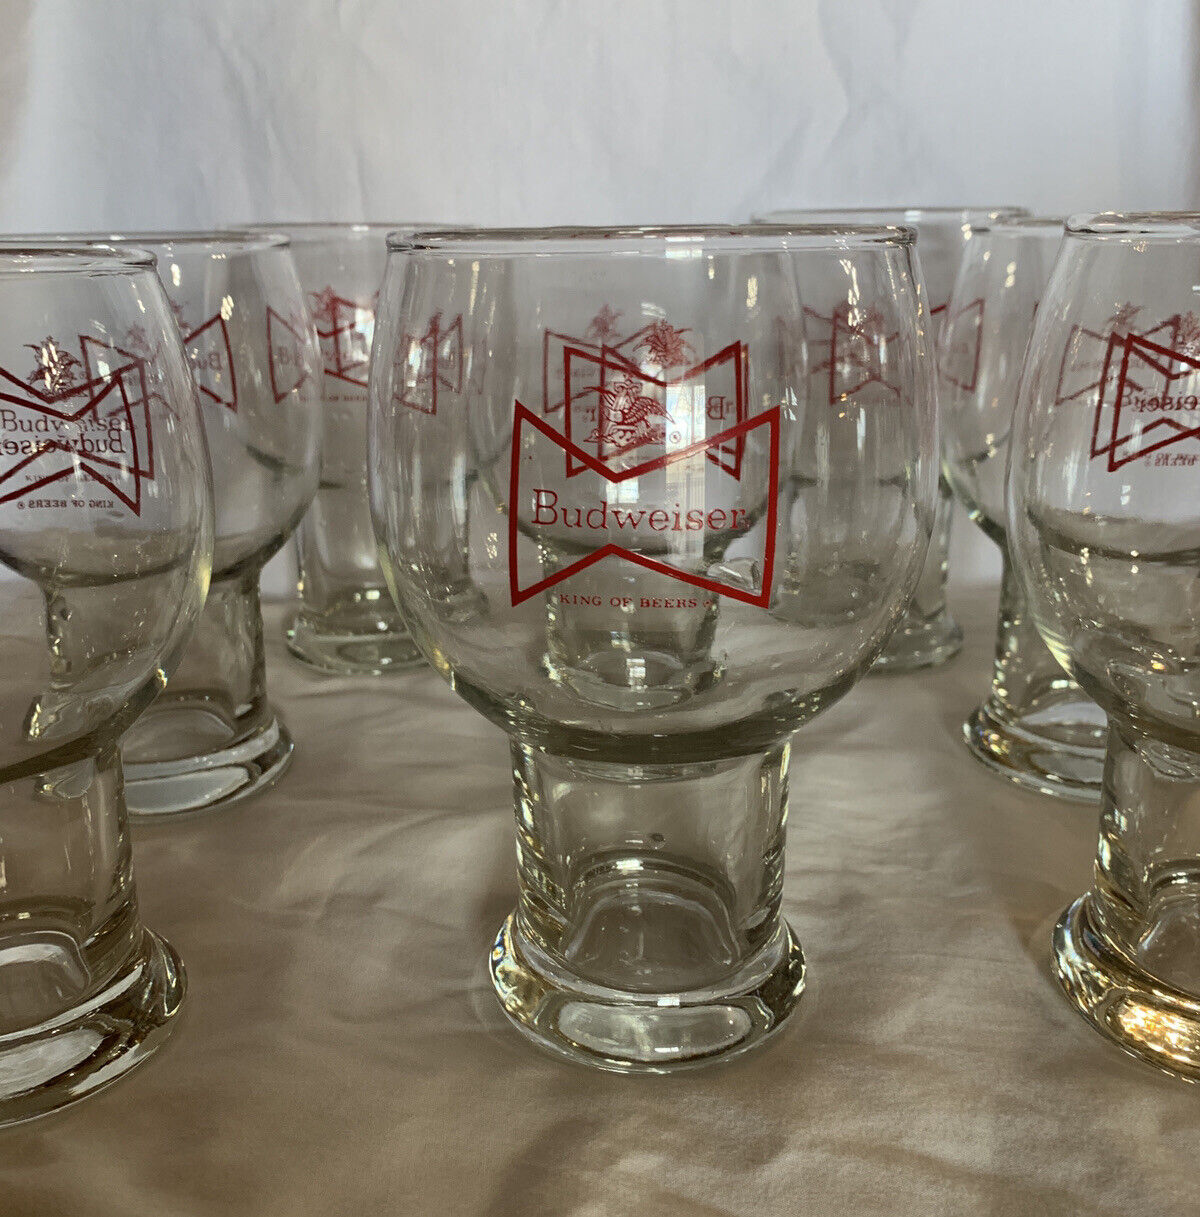 8- Rare Vintage Budwieser Beer Glasses with Hollow Stems